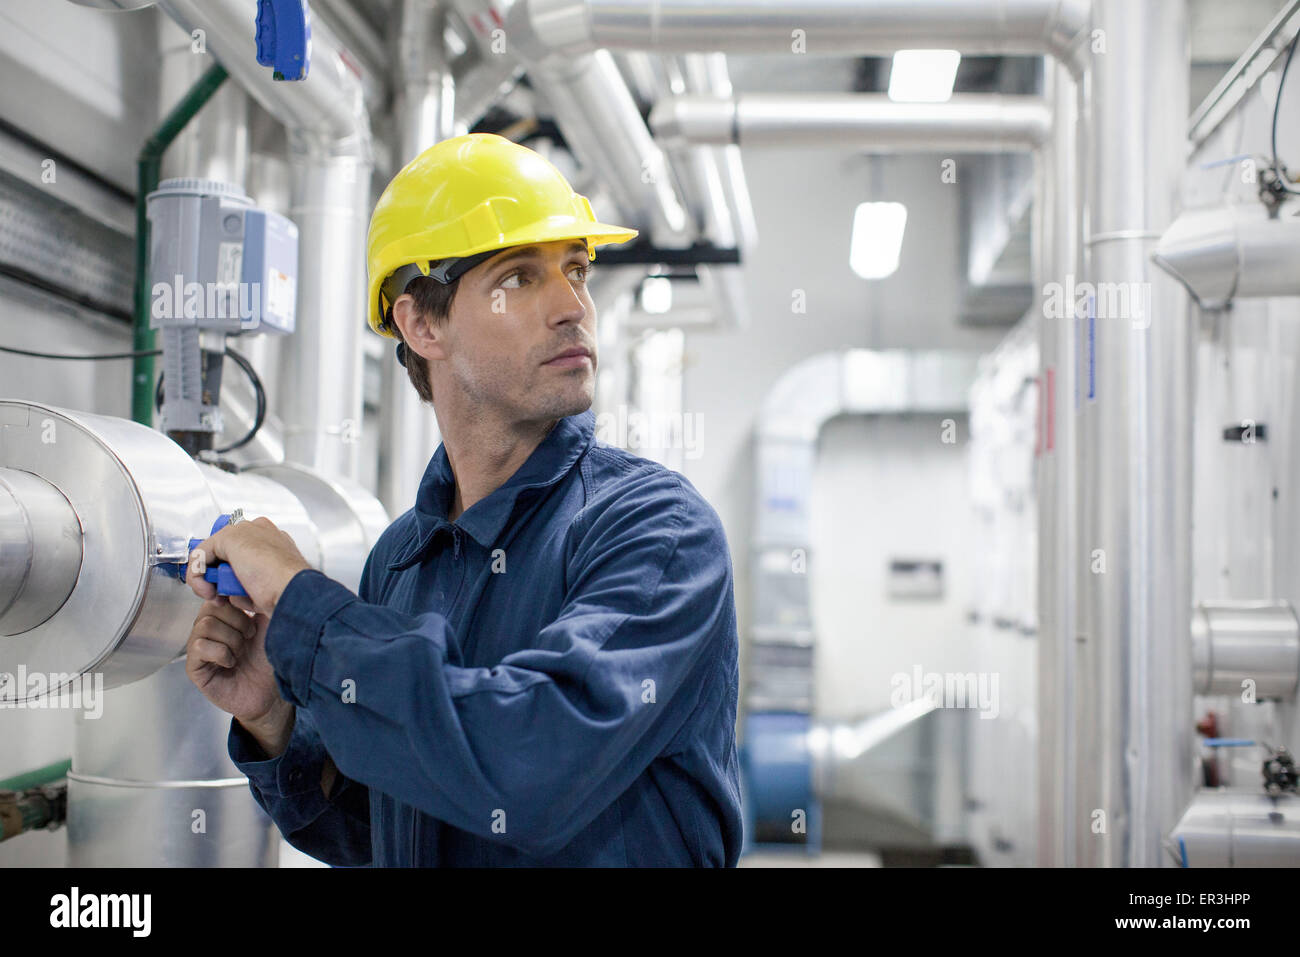 Skilled worker at work in industrial plant Stock Photo